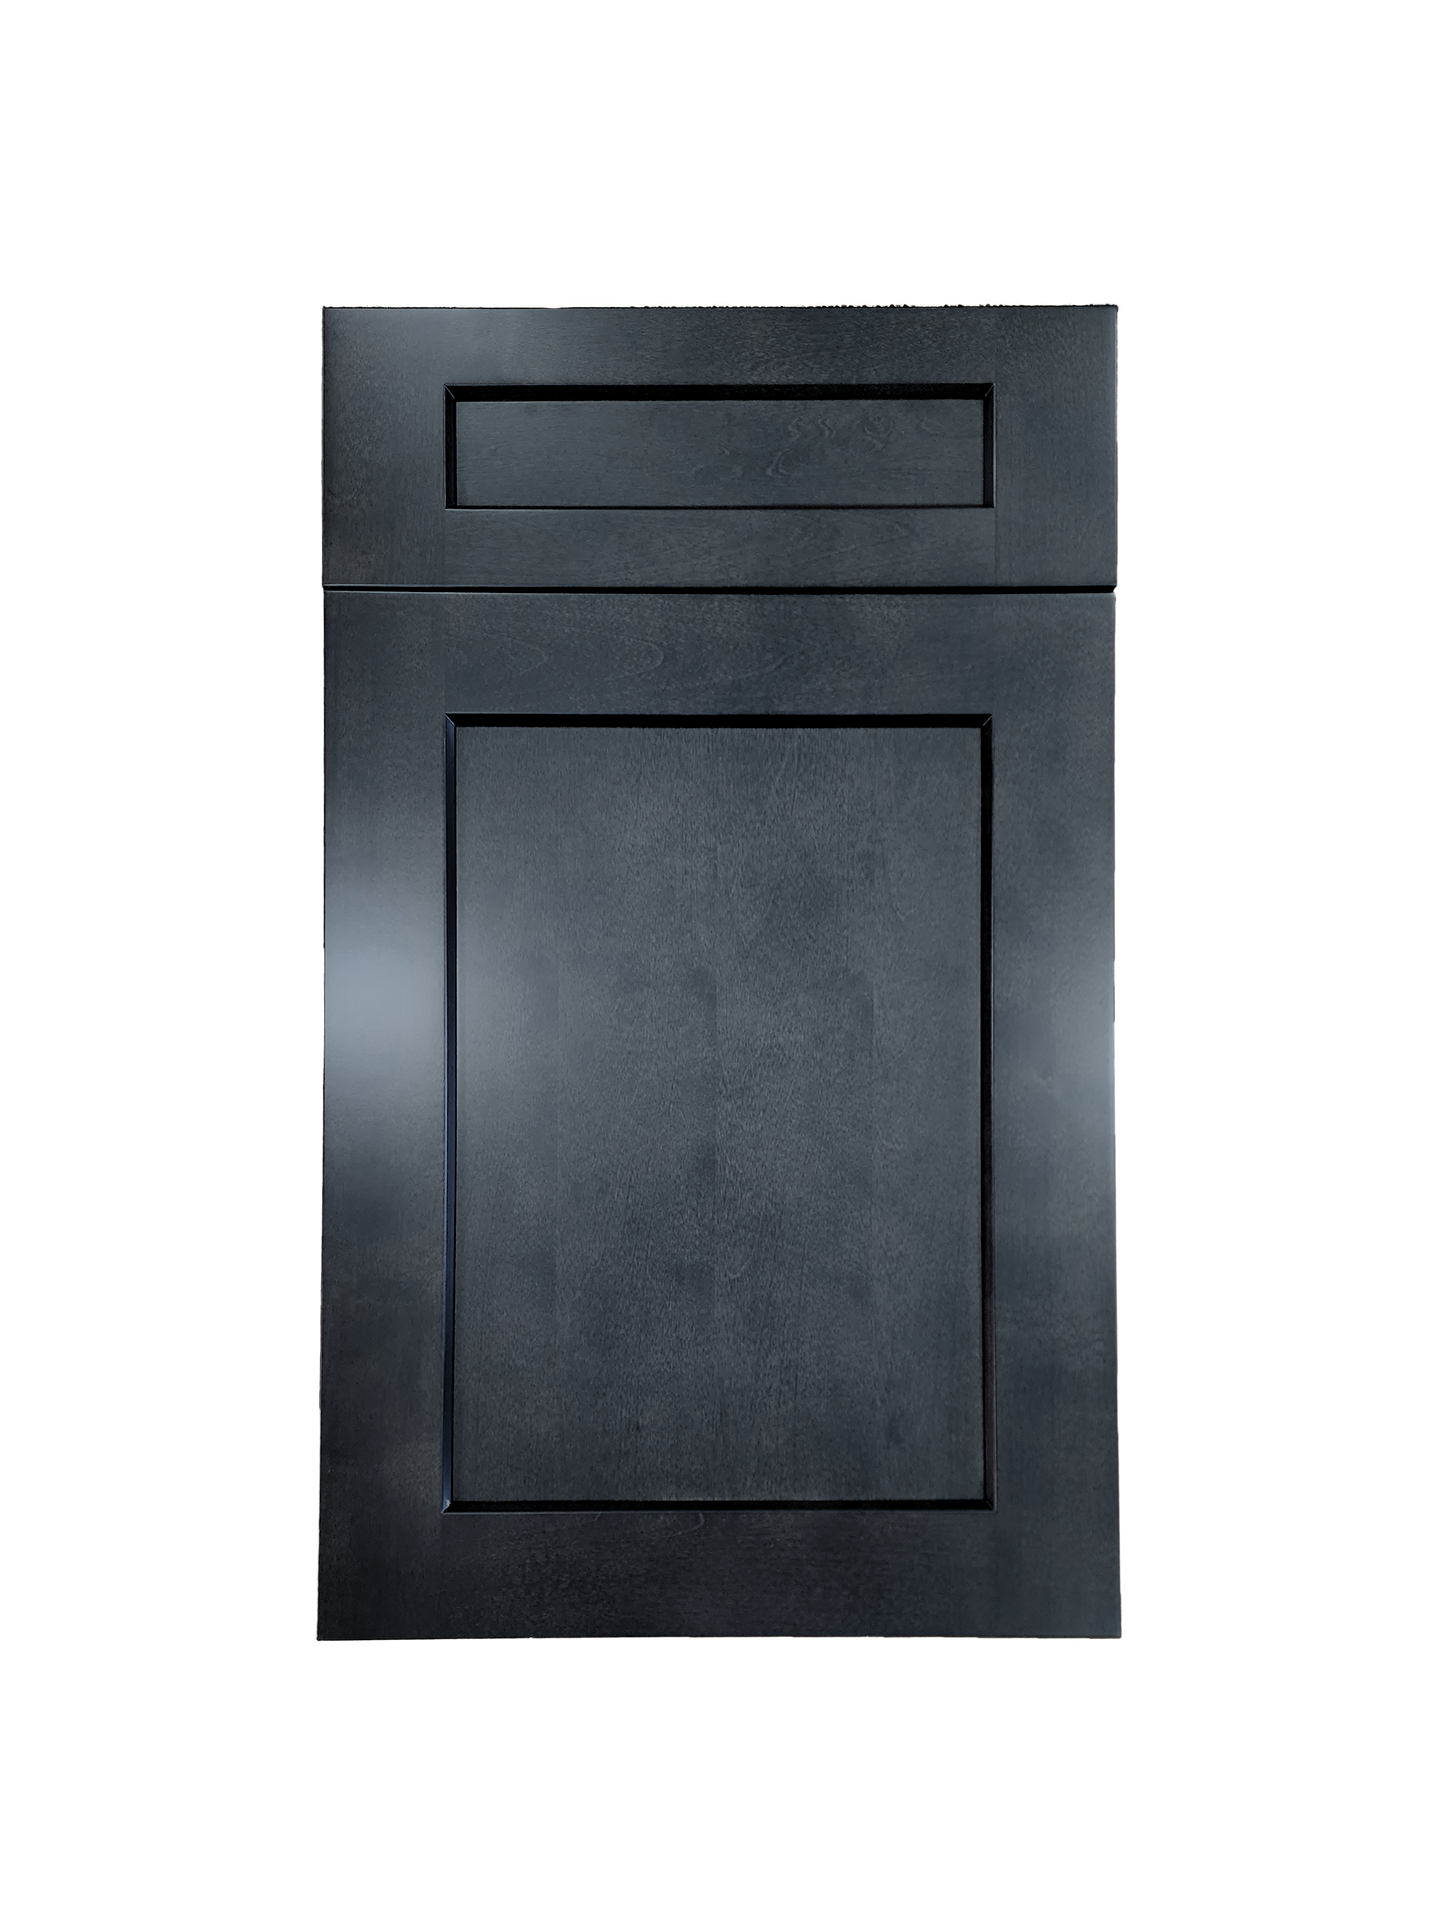 Stormy Grey Wall Cabinet 27 inches wide 12 inches deep 36 inches tall with Stormy Grey box and Stormy Grey doors